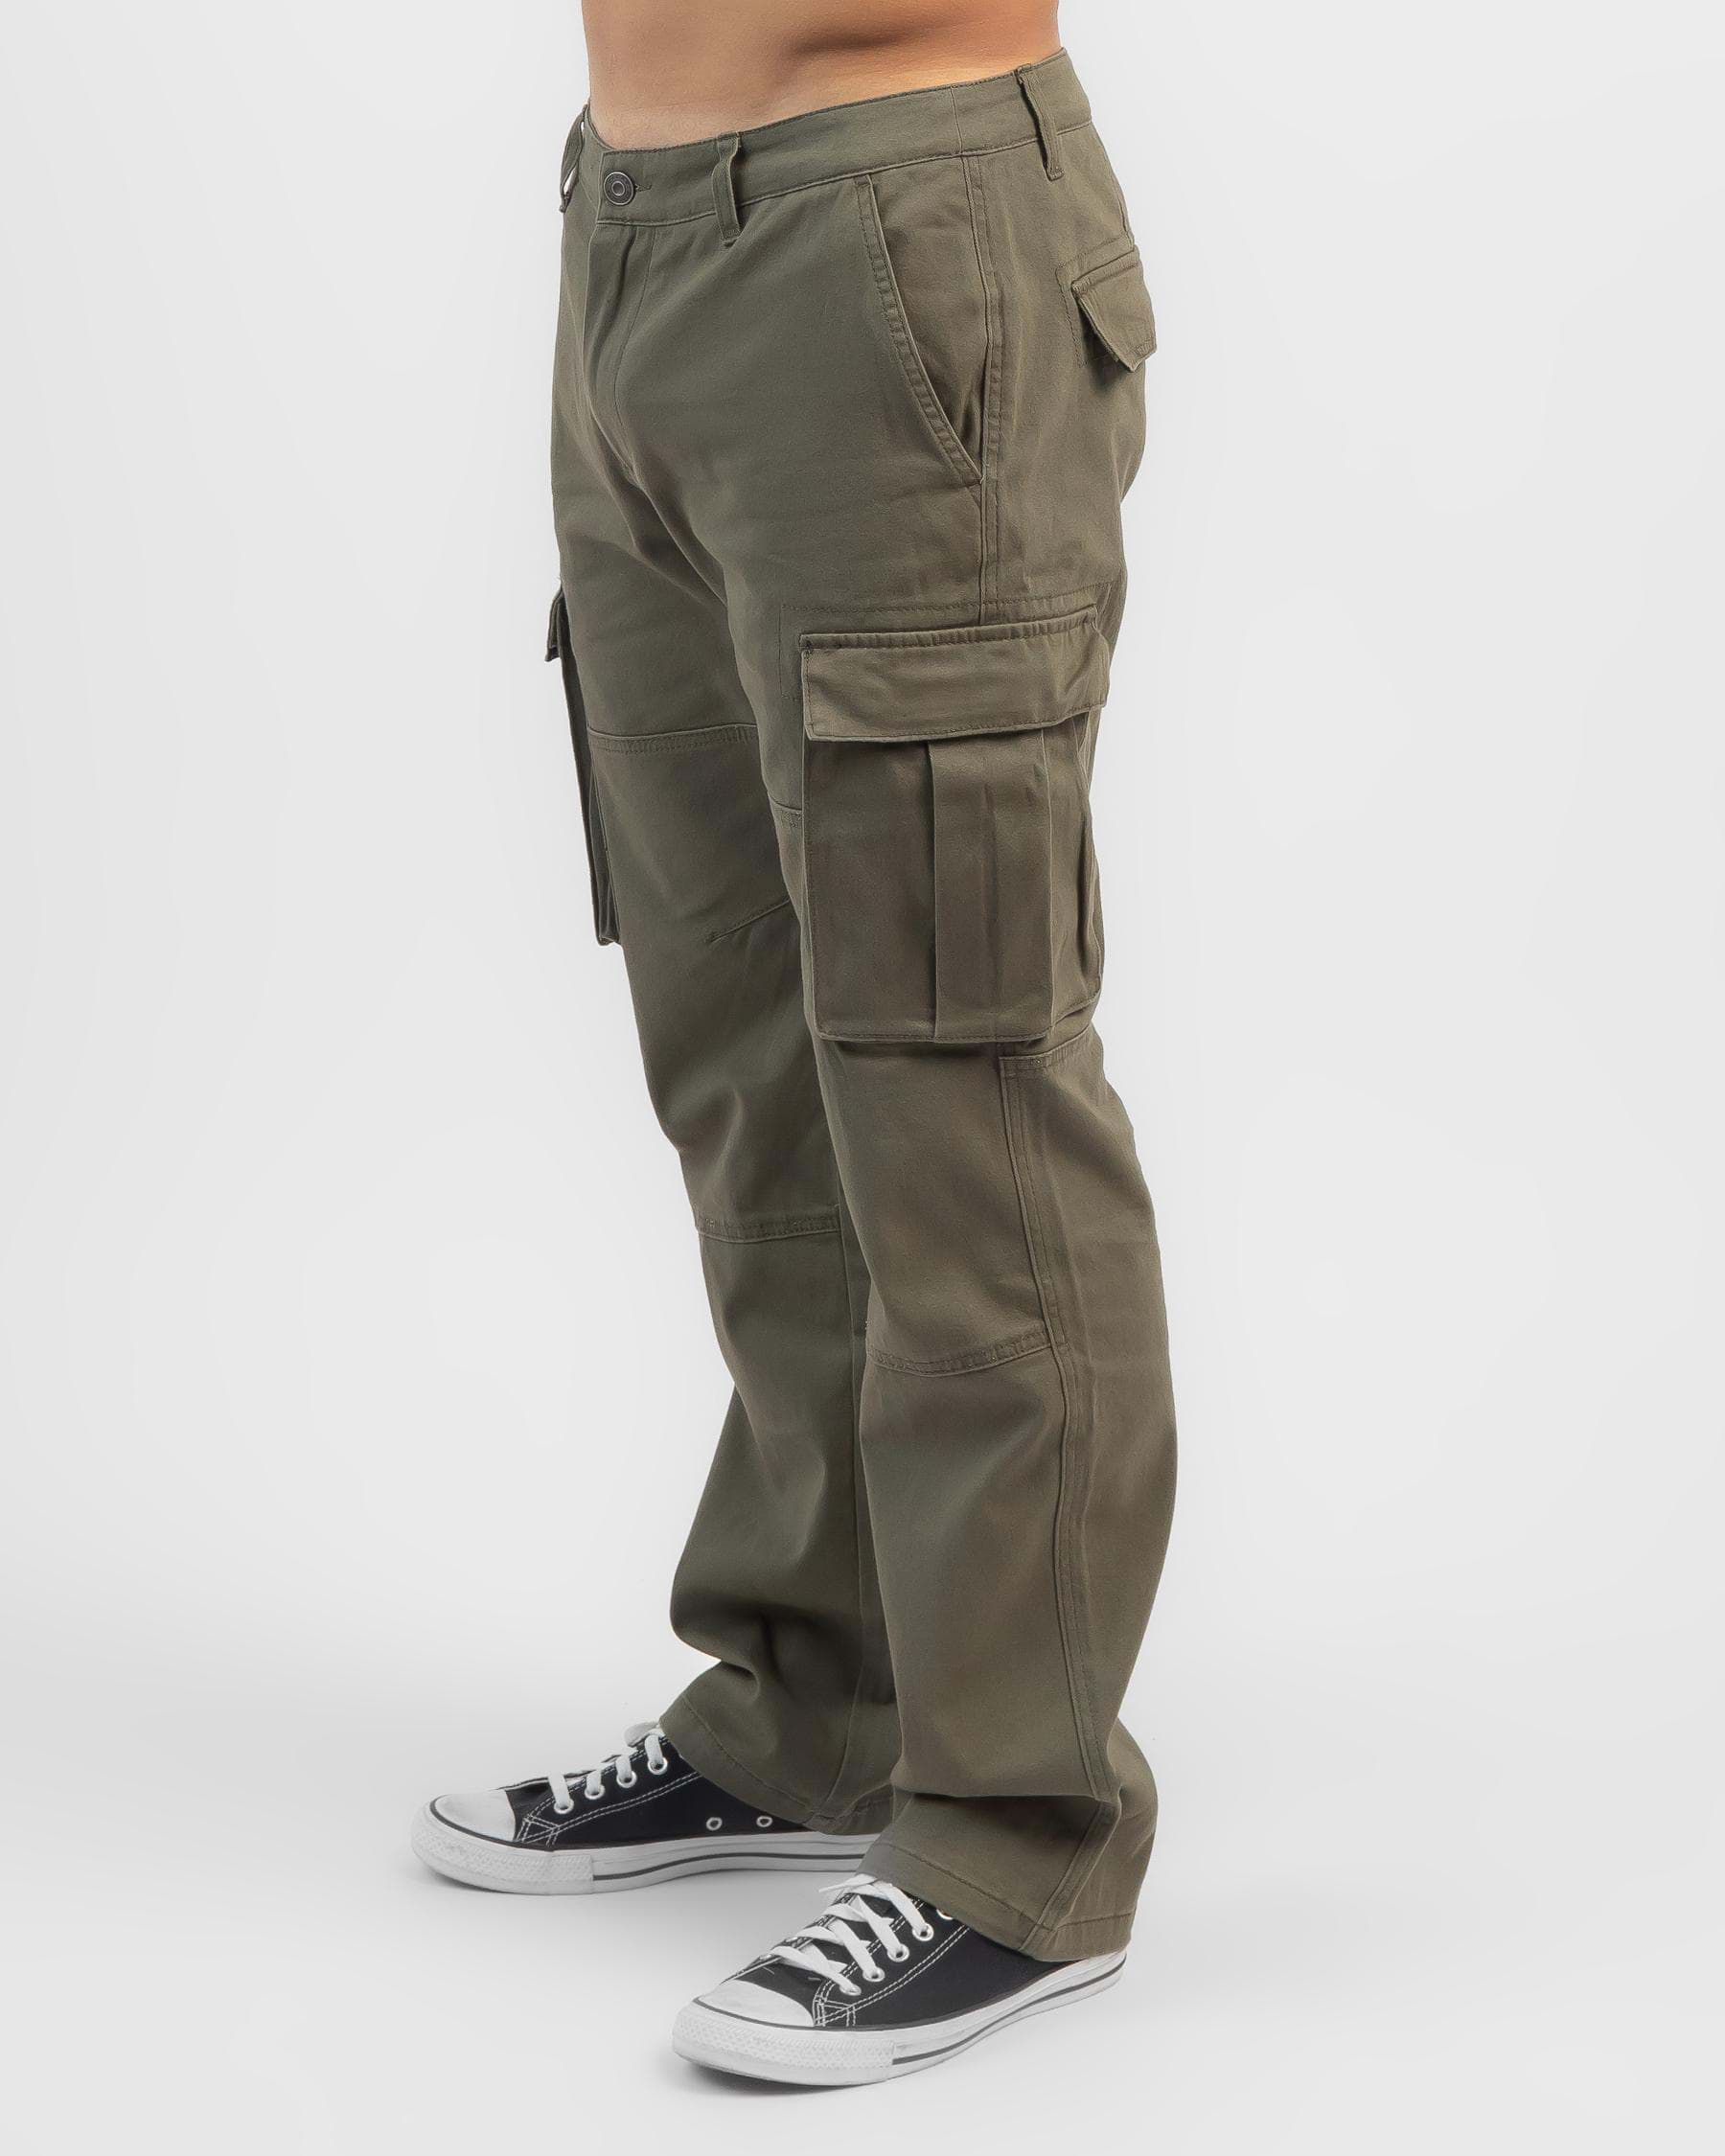 Shop Jacks Urban Pants In Washed Green - Fast Shipping & Easy Returns ...